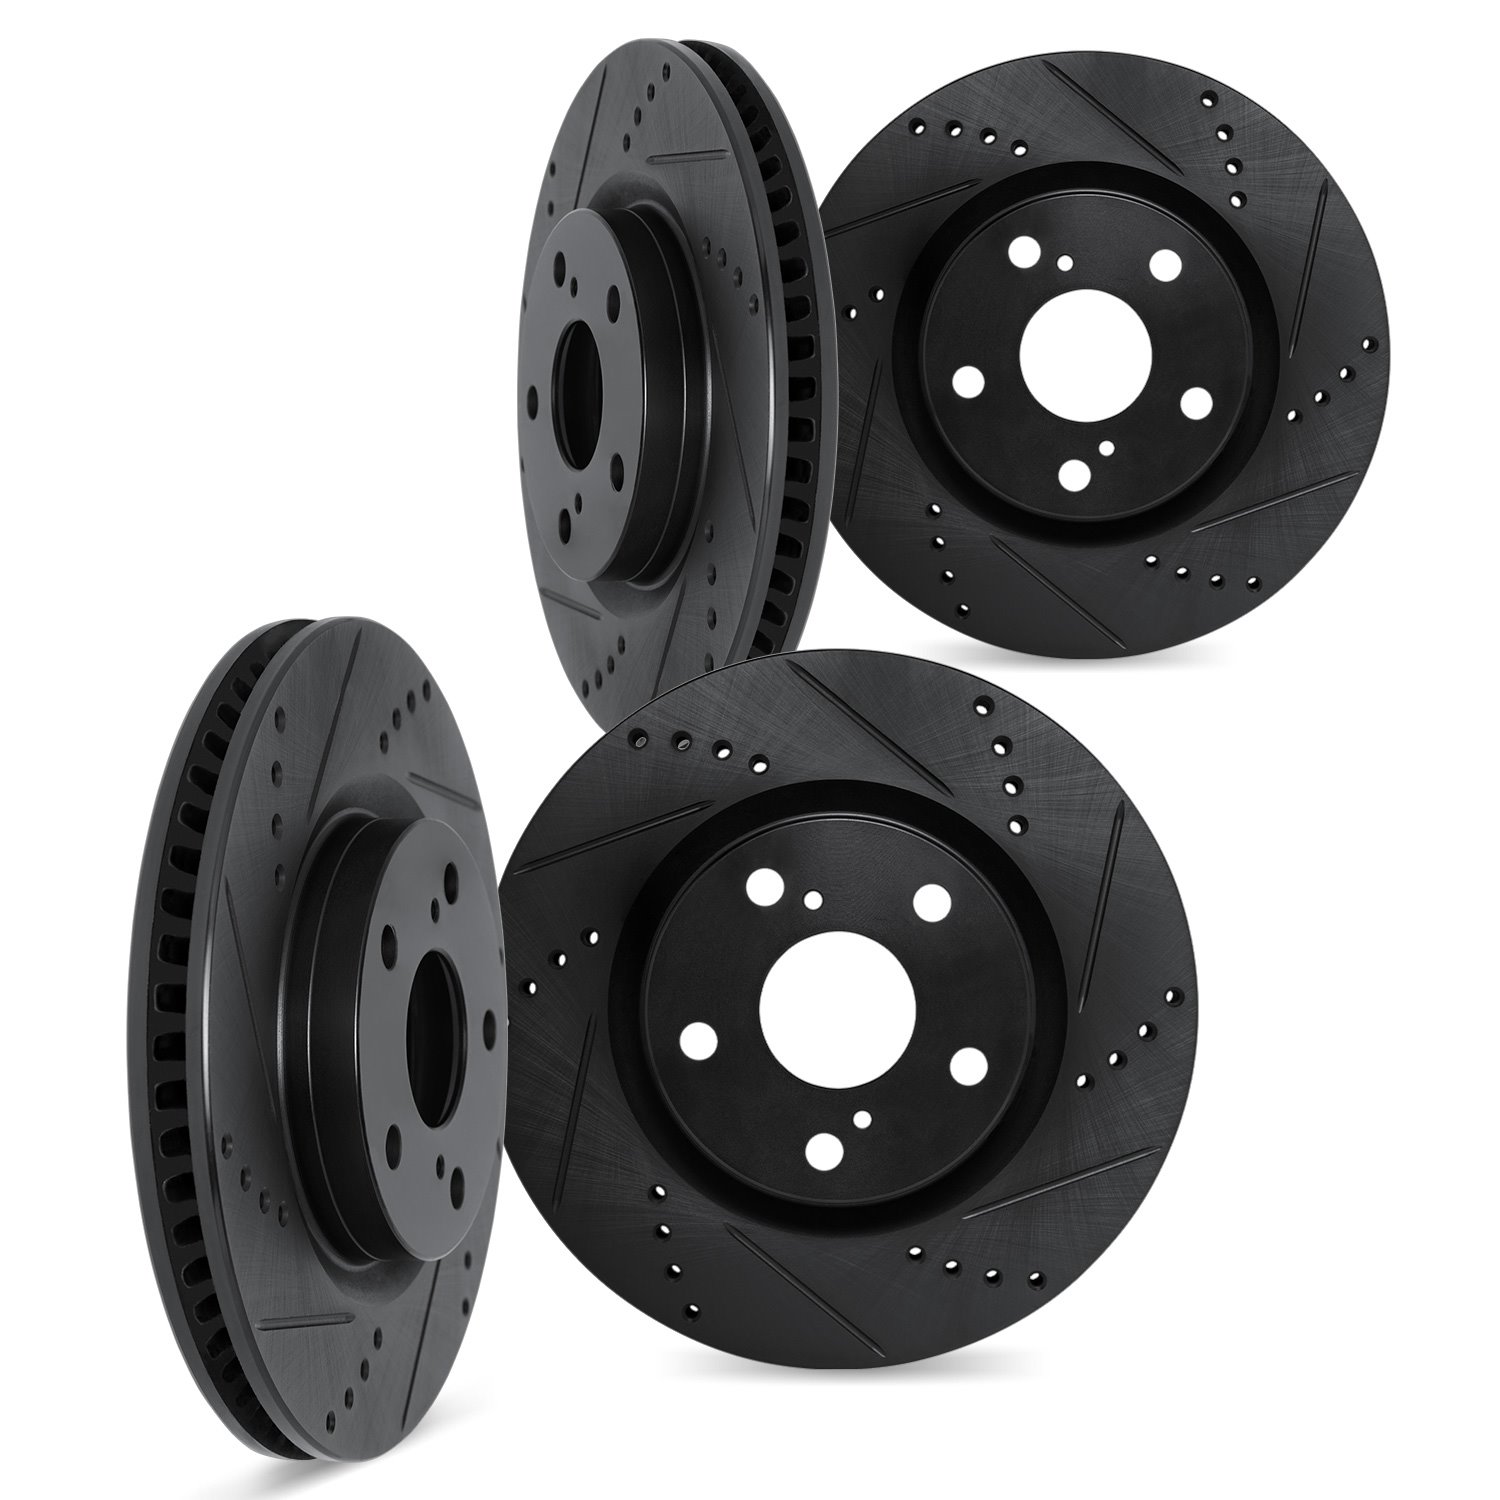 8004-75021 Drilled/Slotted Brake Rotors [Black], 1995-2000 Lexus/Toyota/Scion, Position: Front and Rear